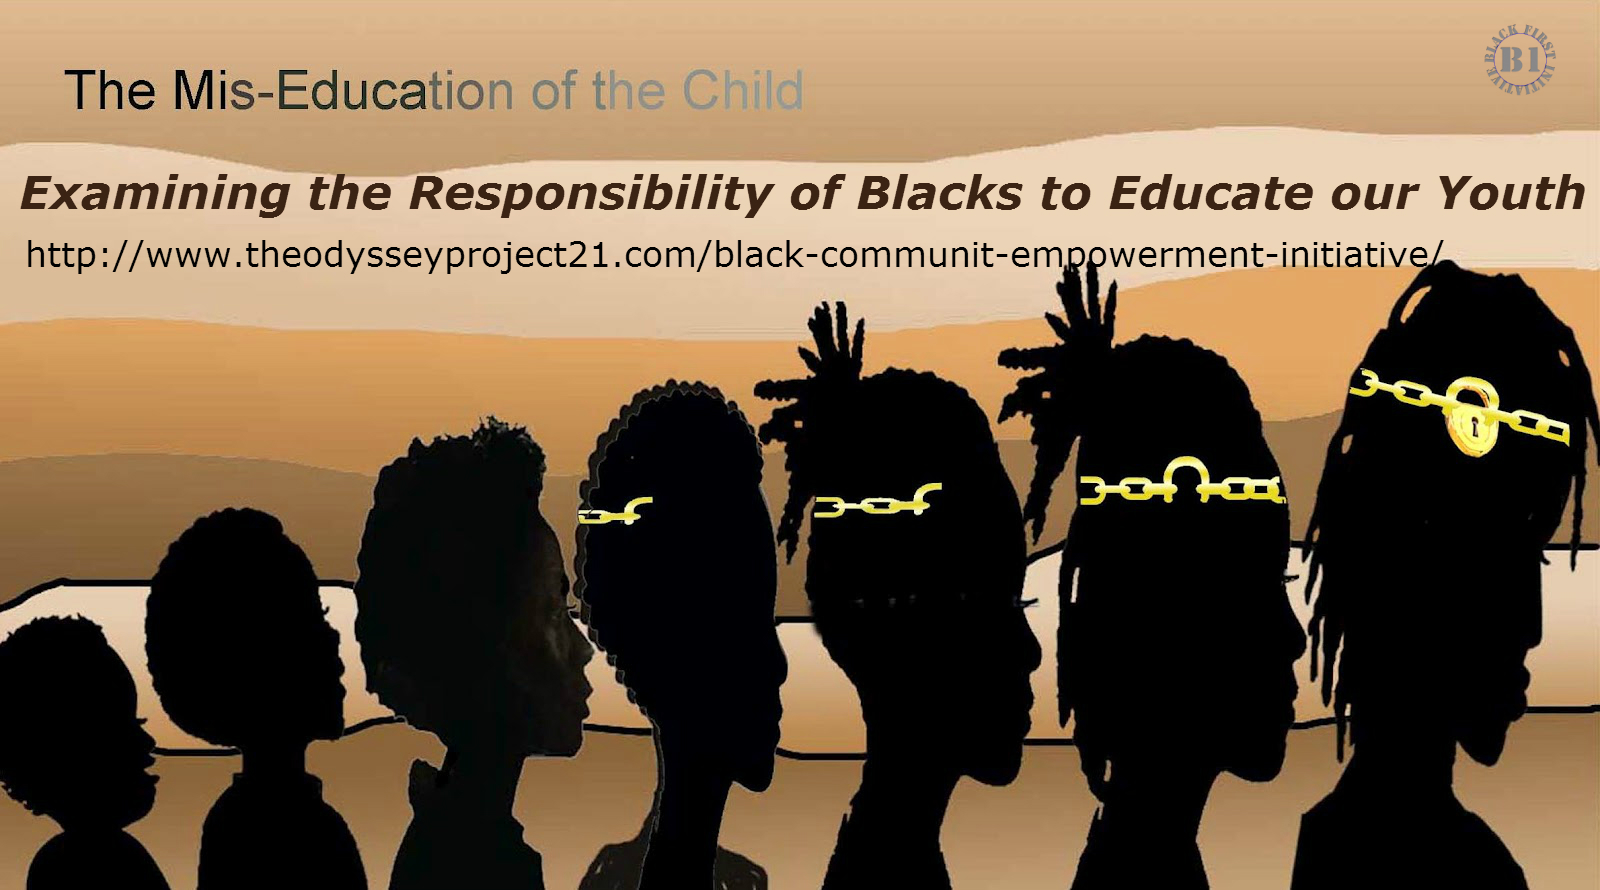 The Mis-education of Black Youth in America